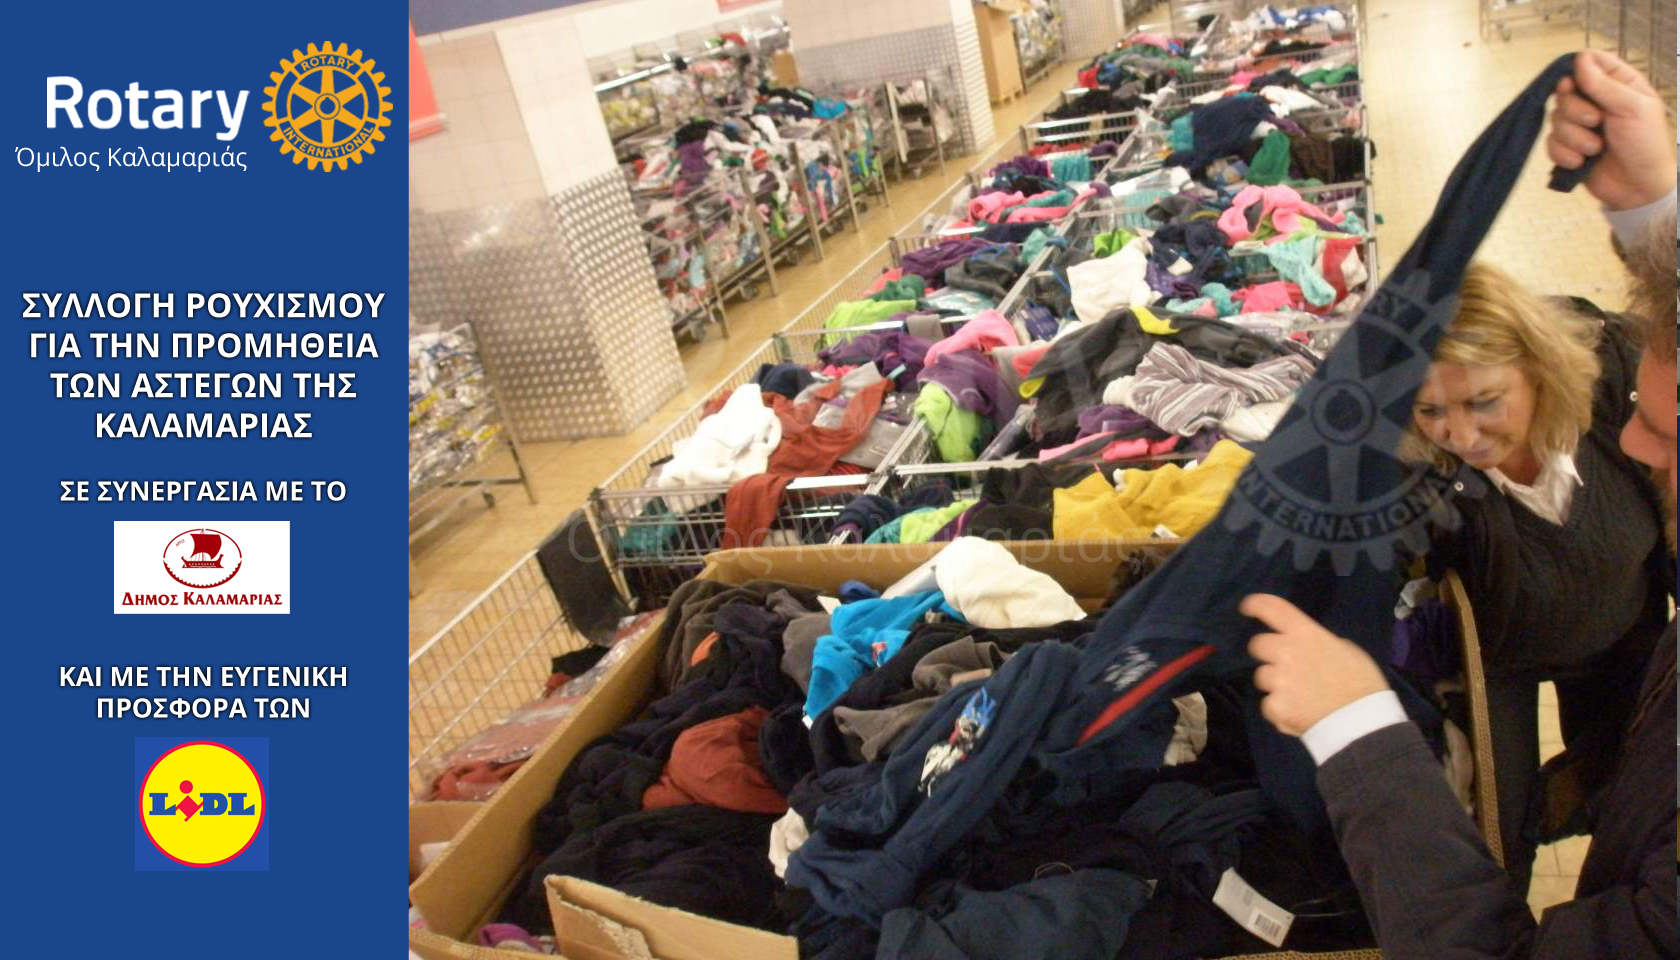 Rotary-Club-Kalamaria-and-Lidl-give-clothes-for-homeles-005